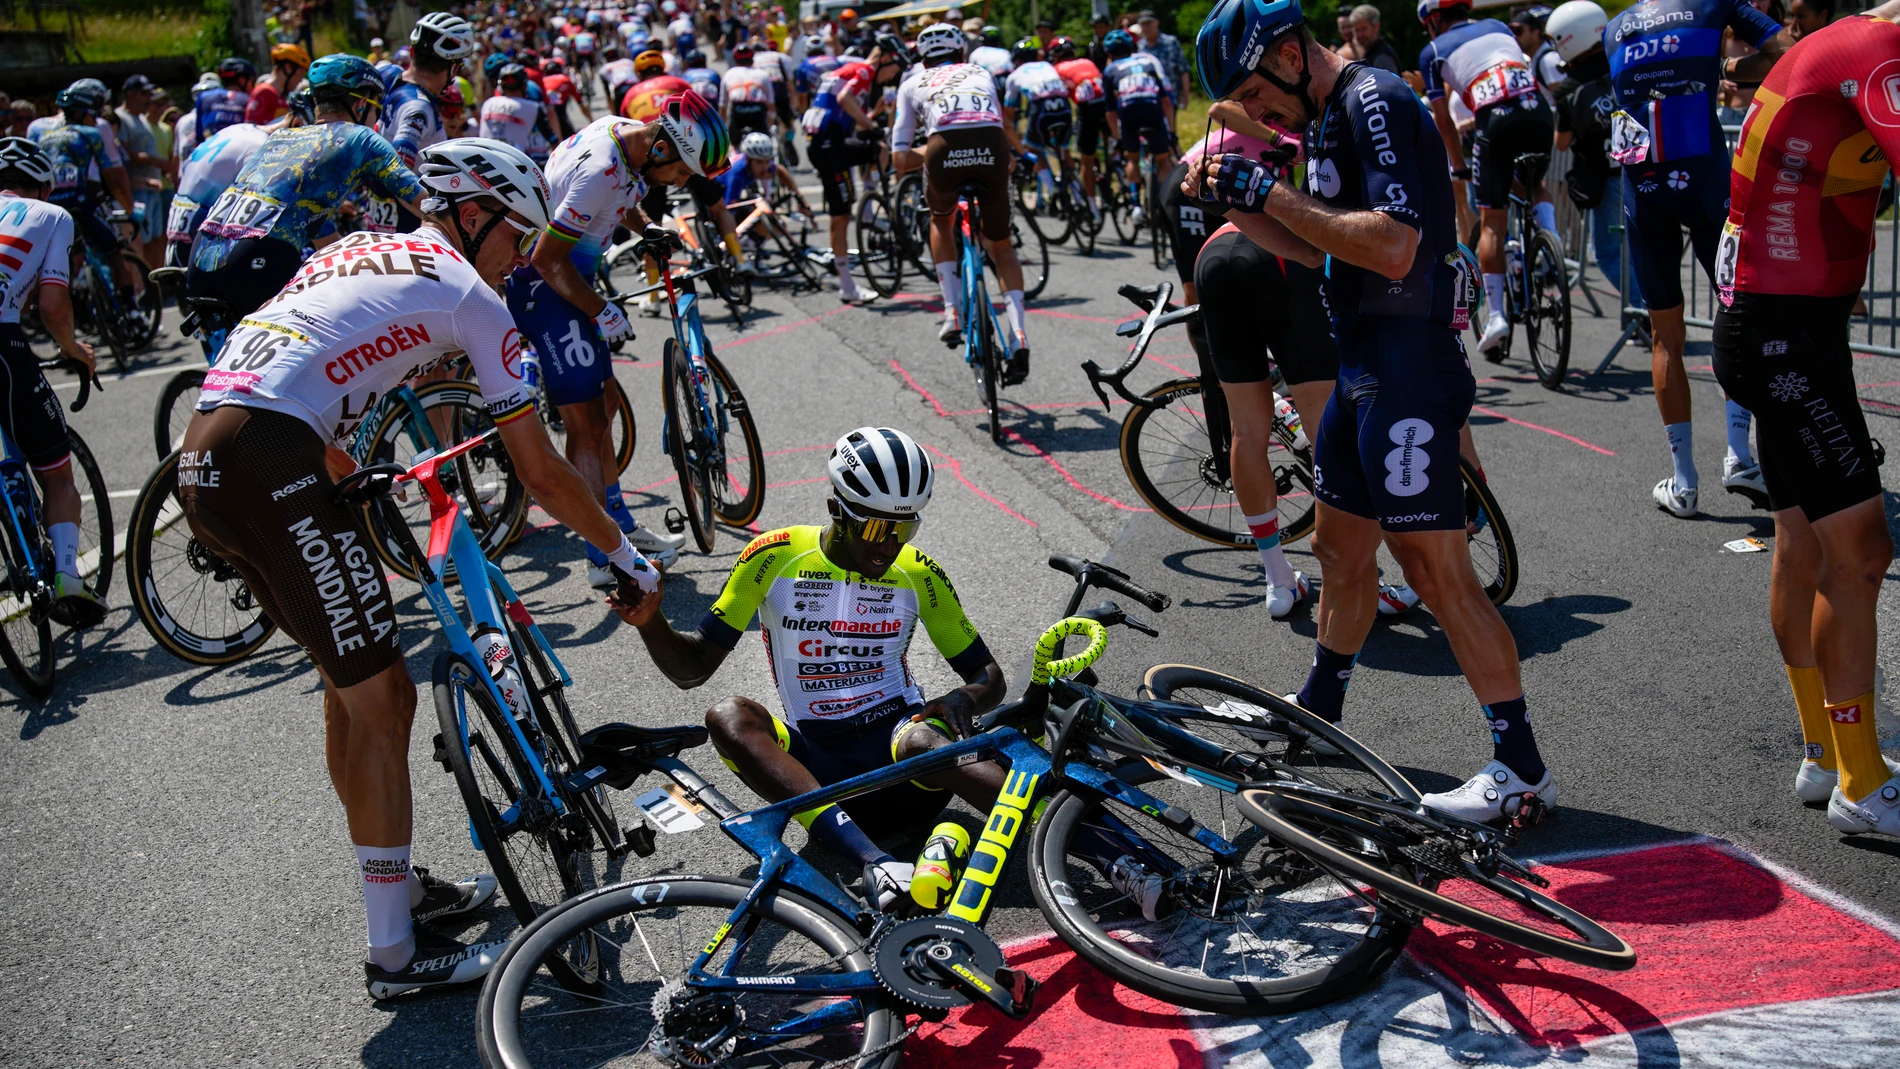 Eritrea's Biniam Girmay gets a helping hand from Belgium's Olivier Naesen, left, after crashing during the fifteenth stage of the Tour de France cycling race over 179 kilometers (111 miles) with start in Les Gets Les Portes du Soleil and finish in Saint-Gervais Mont-Blanc, France, Sunday, July 16, 2023. (AP Photo/Daniel Cole)